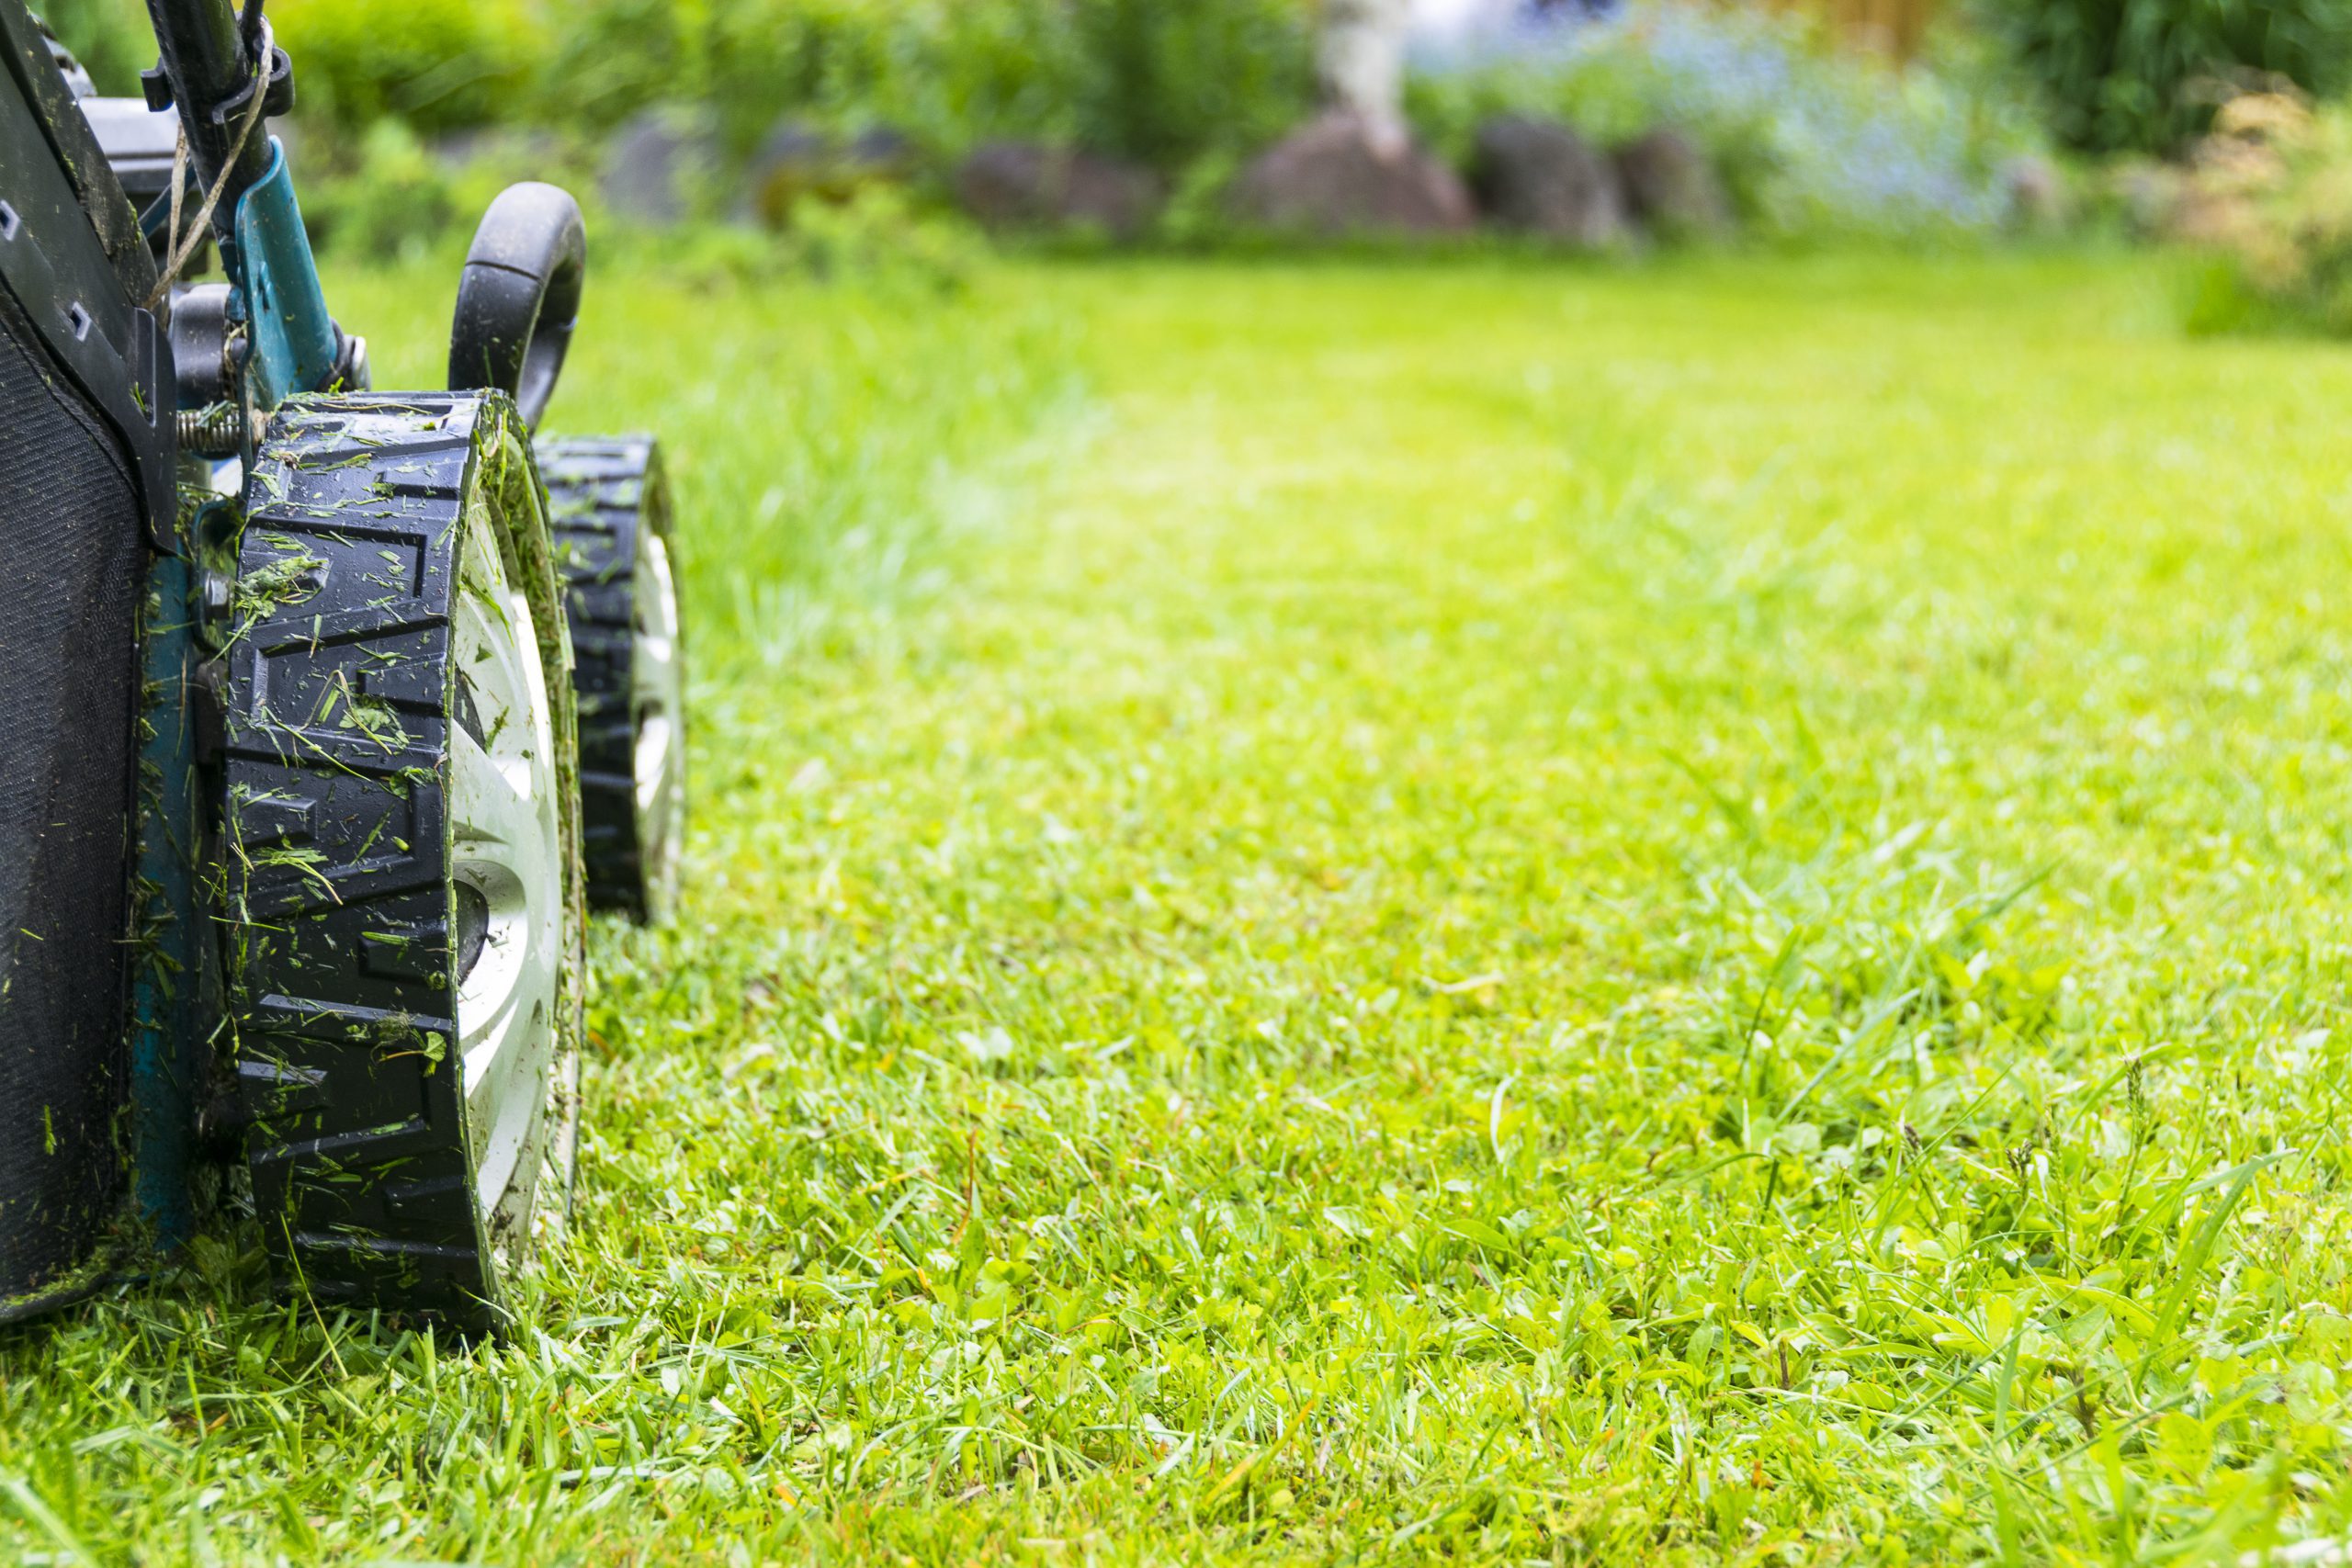 The Easiest Way To Make Money Mowing Lawns